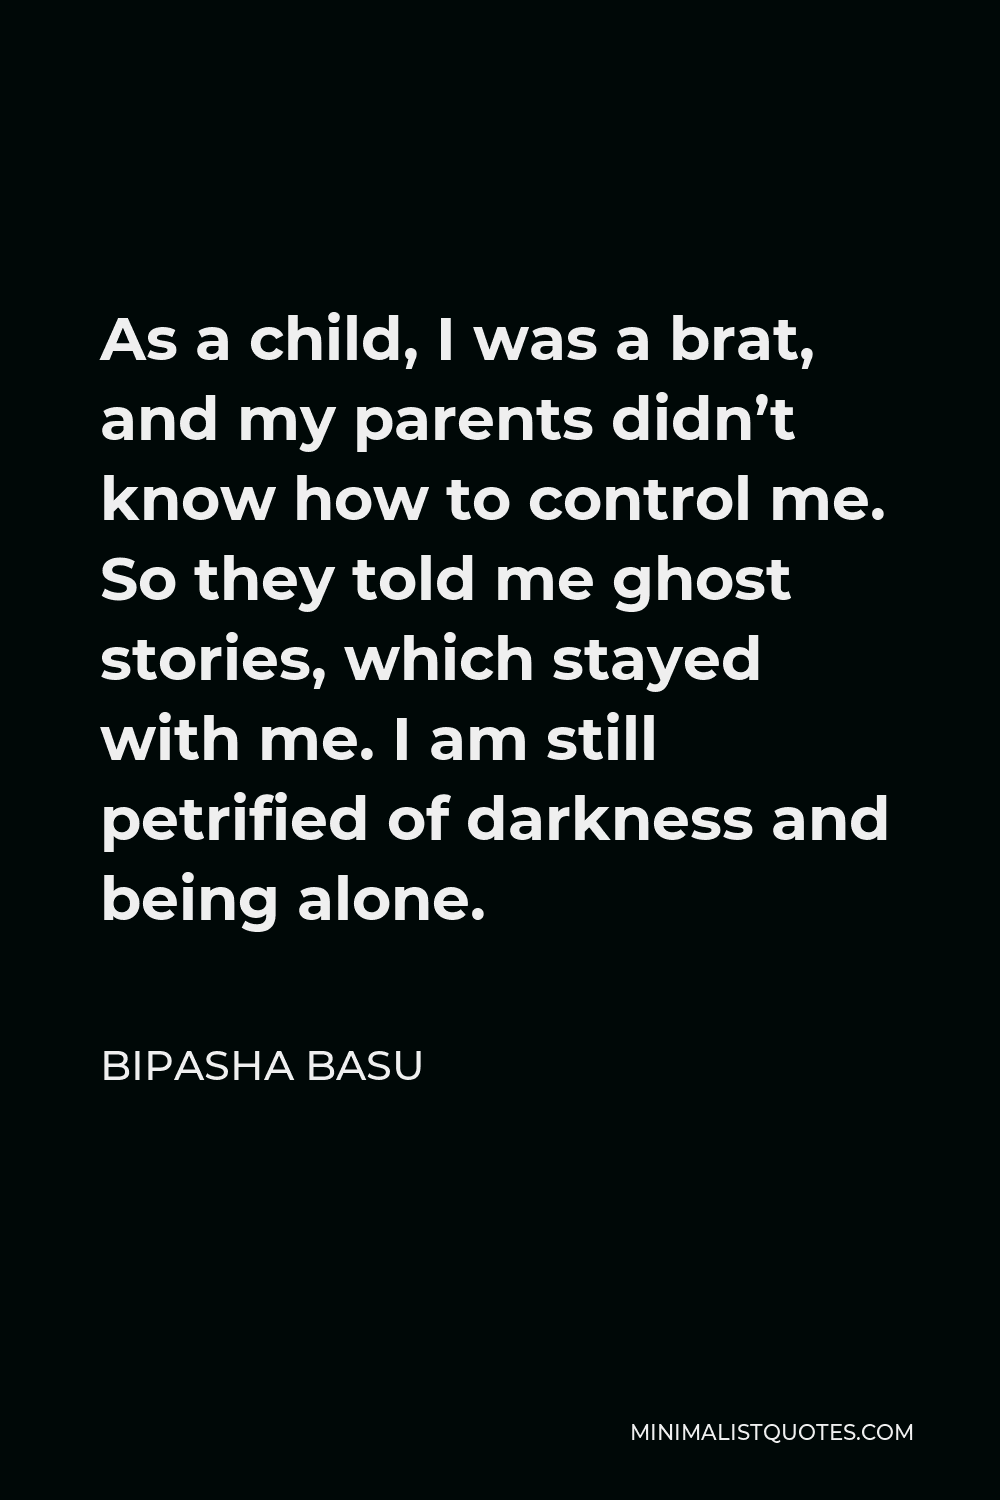 Bipasha Basu Quote - As a child, I was a brat, and my parents didn’t know how to control me. So they told me ghost stories, which stayed with me. I am still petrified of darkness and being alone.